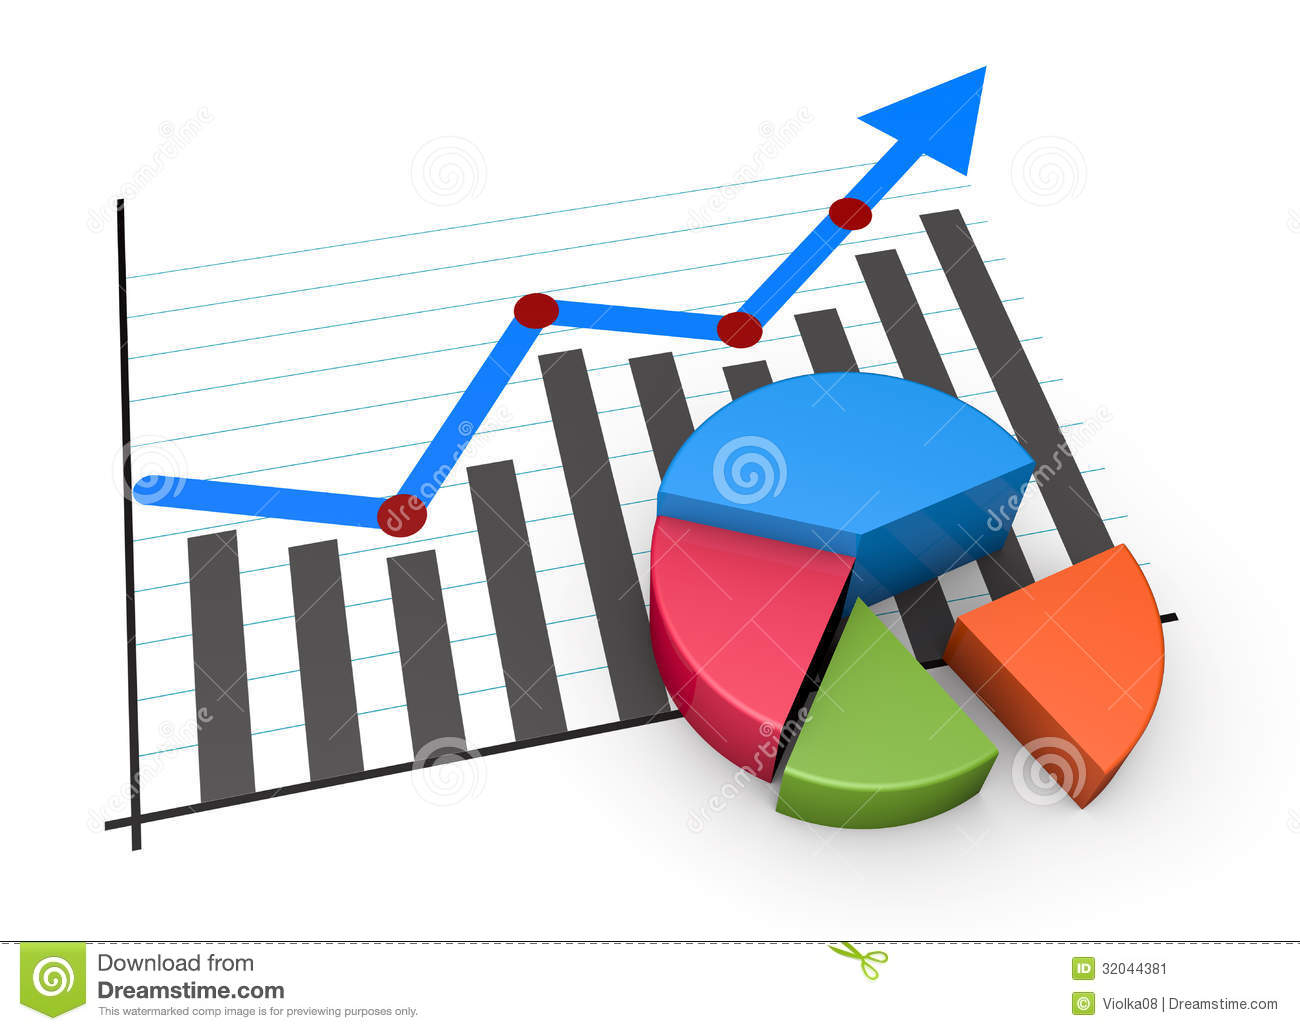 Business Graph Growth Stock Image   Image  32044381